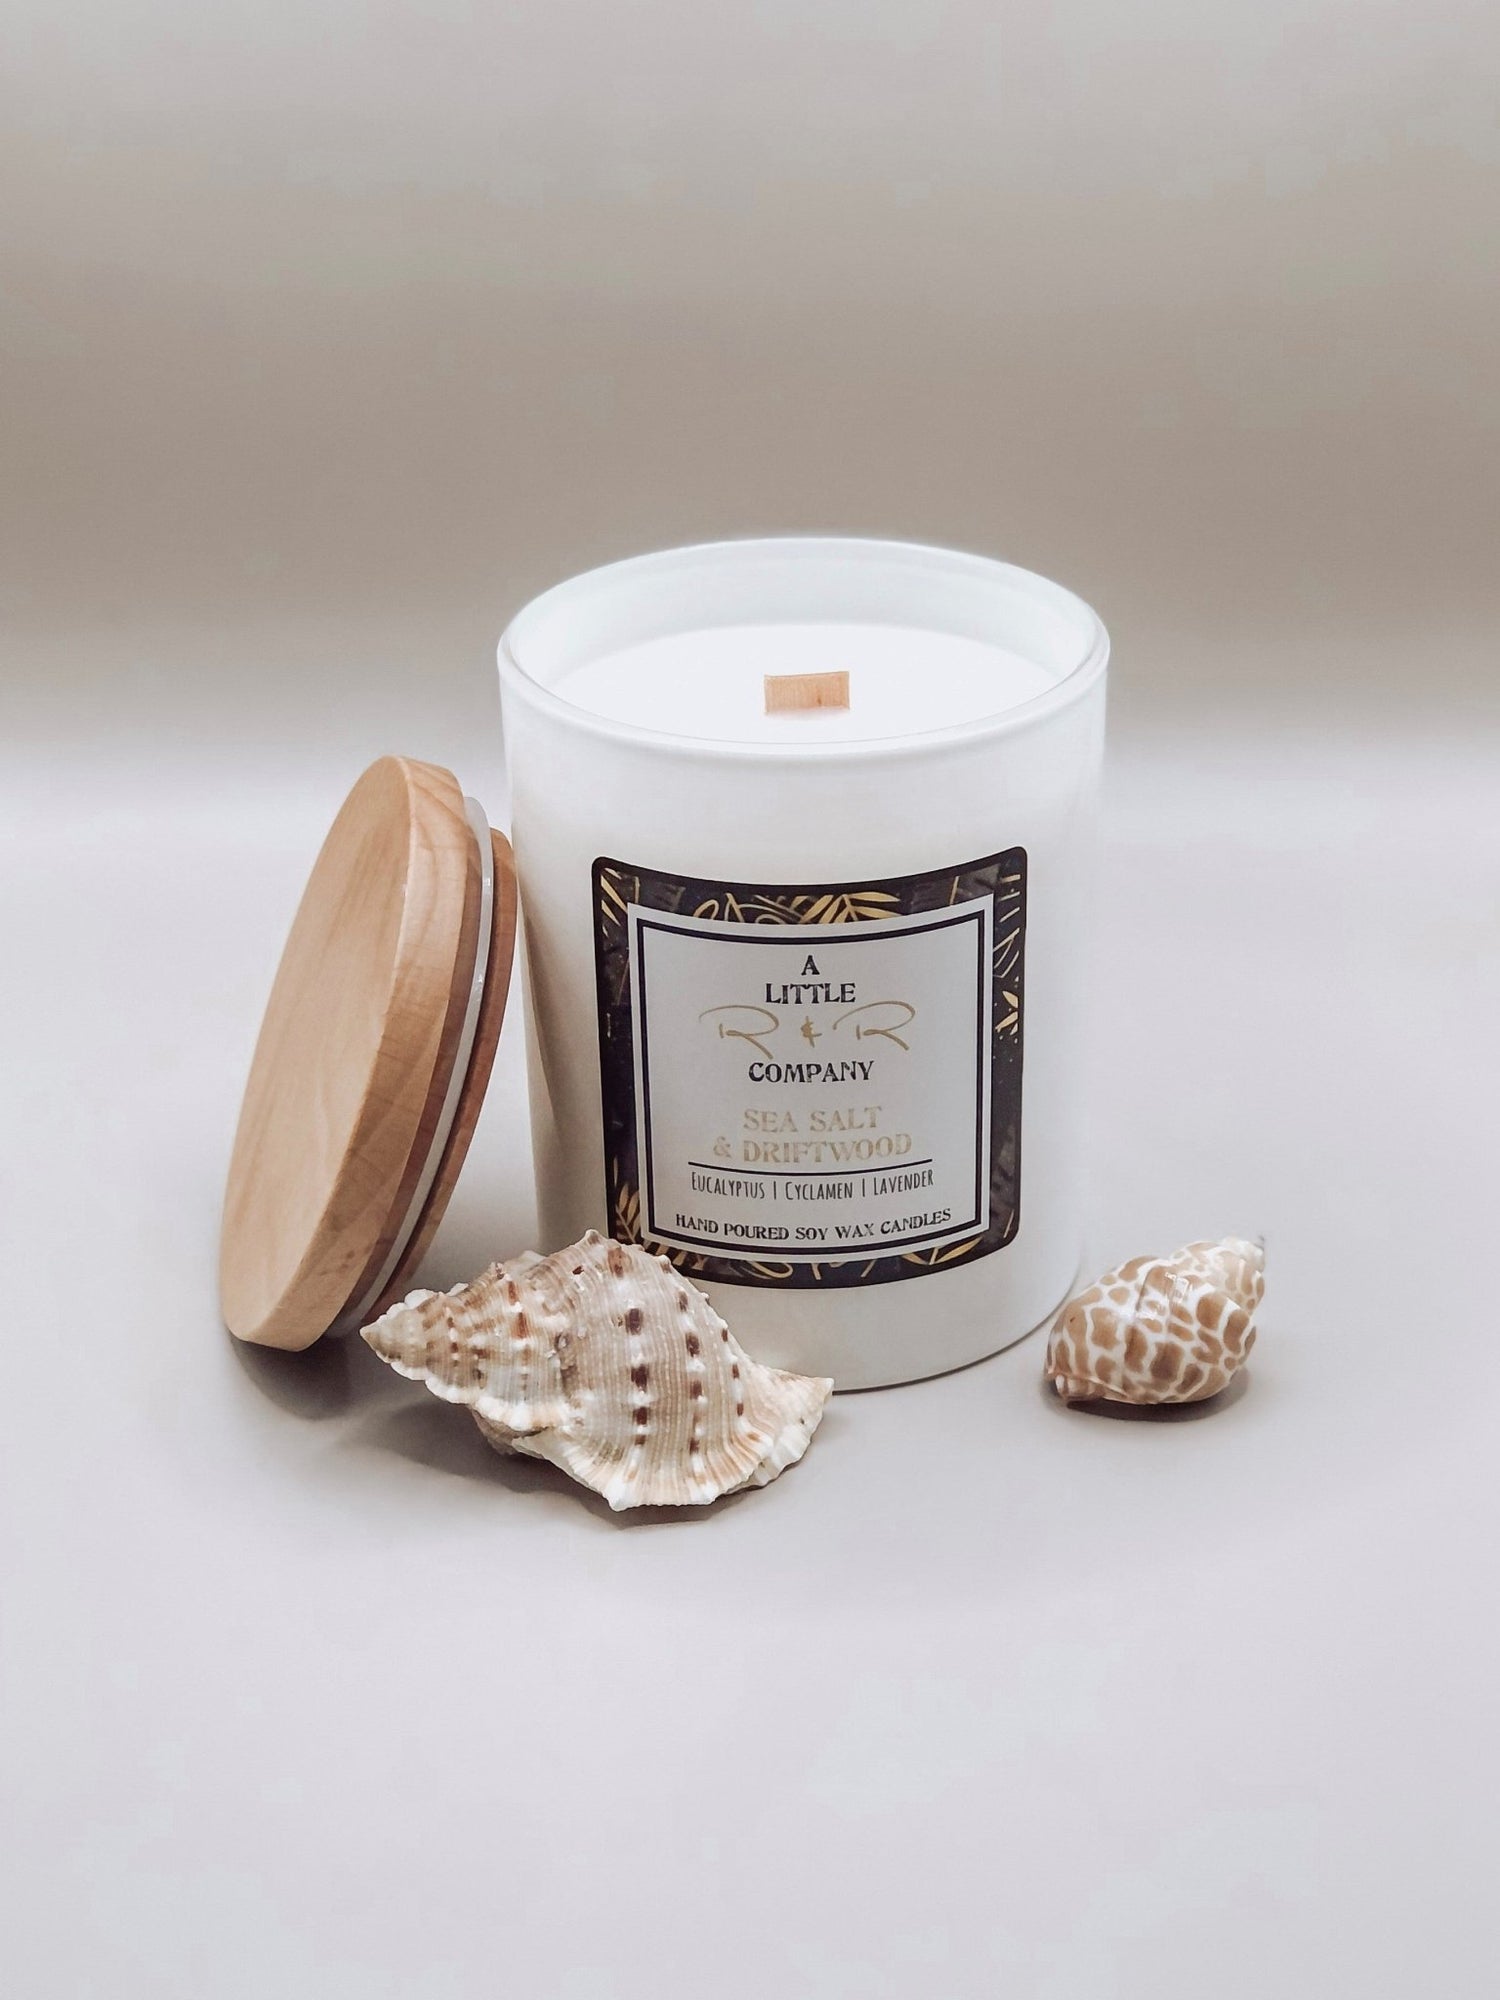 Achieving Perfectly Even Burns: The Secrets of Soy Wax Candles - alittlernrcompany